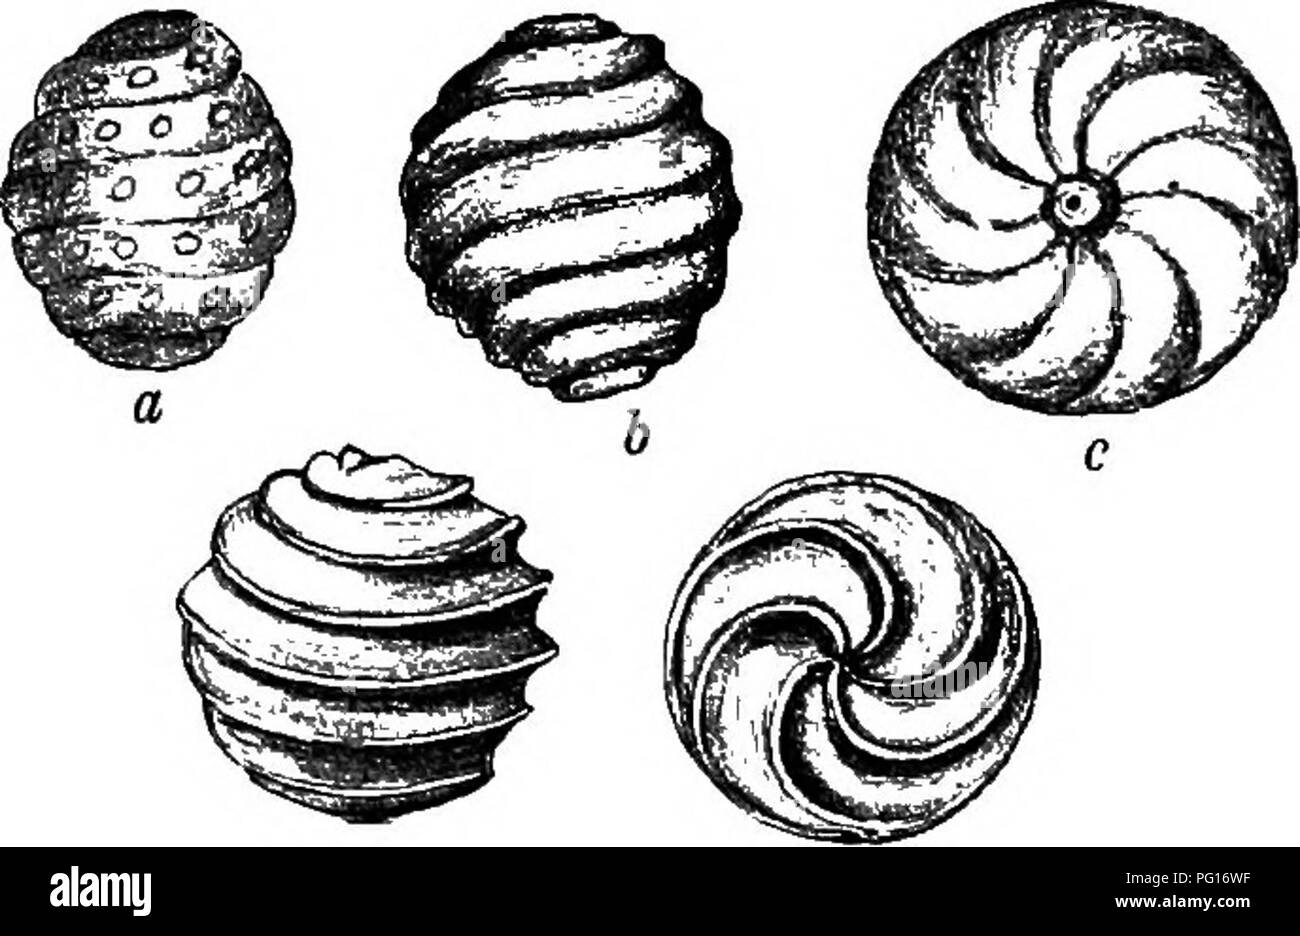 . Fossil plants : for students of botany and geology . Paleobotany. 226 THALLOPHTTA. [CH. they may at least be mentioned as possible but not certain Palaeozoic forms of Ghara or an allied genus.. d e Fig. 46. a. Chara Bleicheri Sa,Tp. x30. 6 and c. Devonian CAara ? sp. circa X 12. d and e. Chara Wrighti Forbes, circa x 12. 1. Chara Bleicheri, Saporta. Fig. 46, a. In this form the ' fruits' are minute and subspherical, &quot;39â&quot;44 mm. long, and â¢â 35â&quot;40 mm. broad, showing in side view 5â6 slightly oblique spiral bands. Each spiral band bears a row of slightly project- ing tubercles Stock Photo